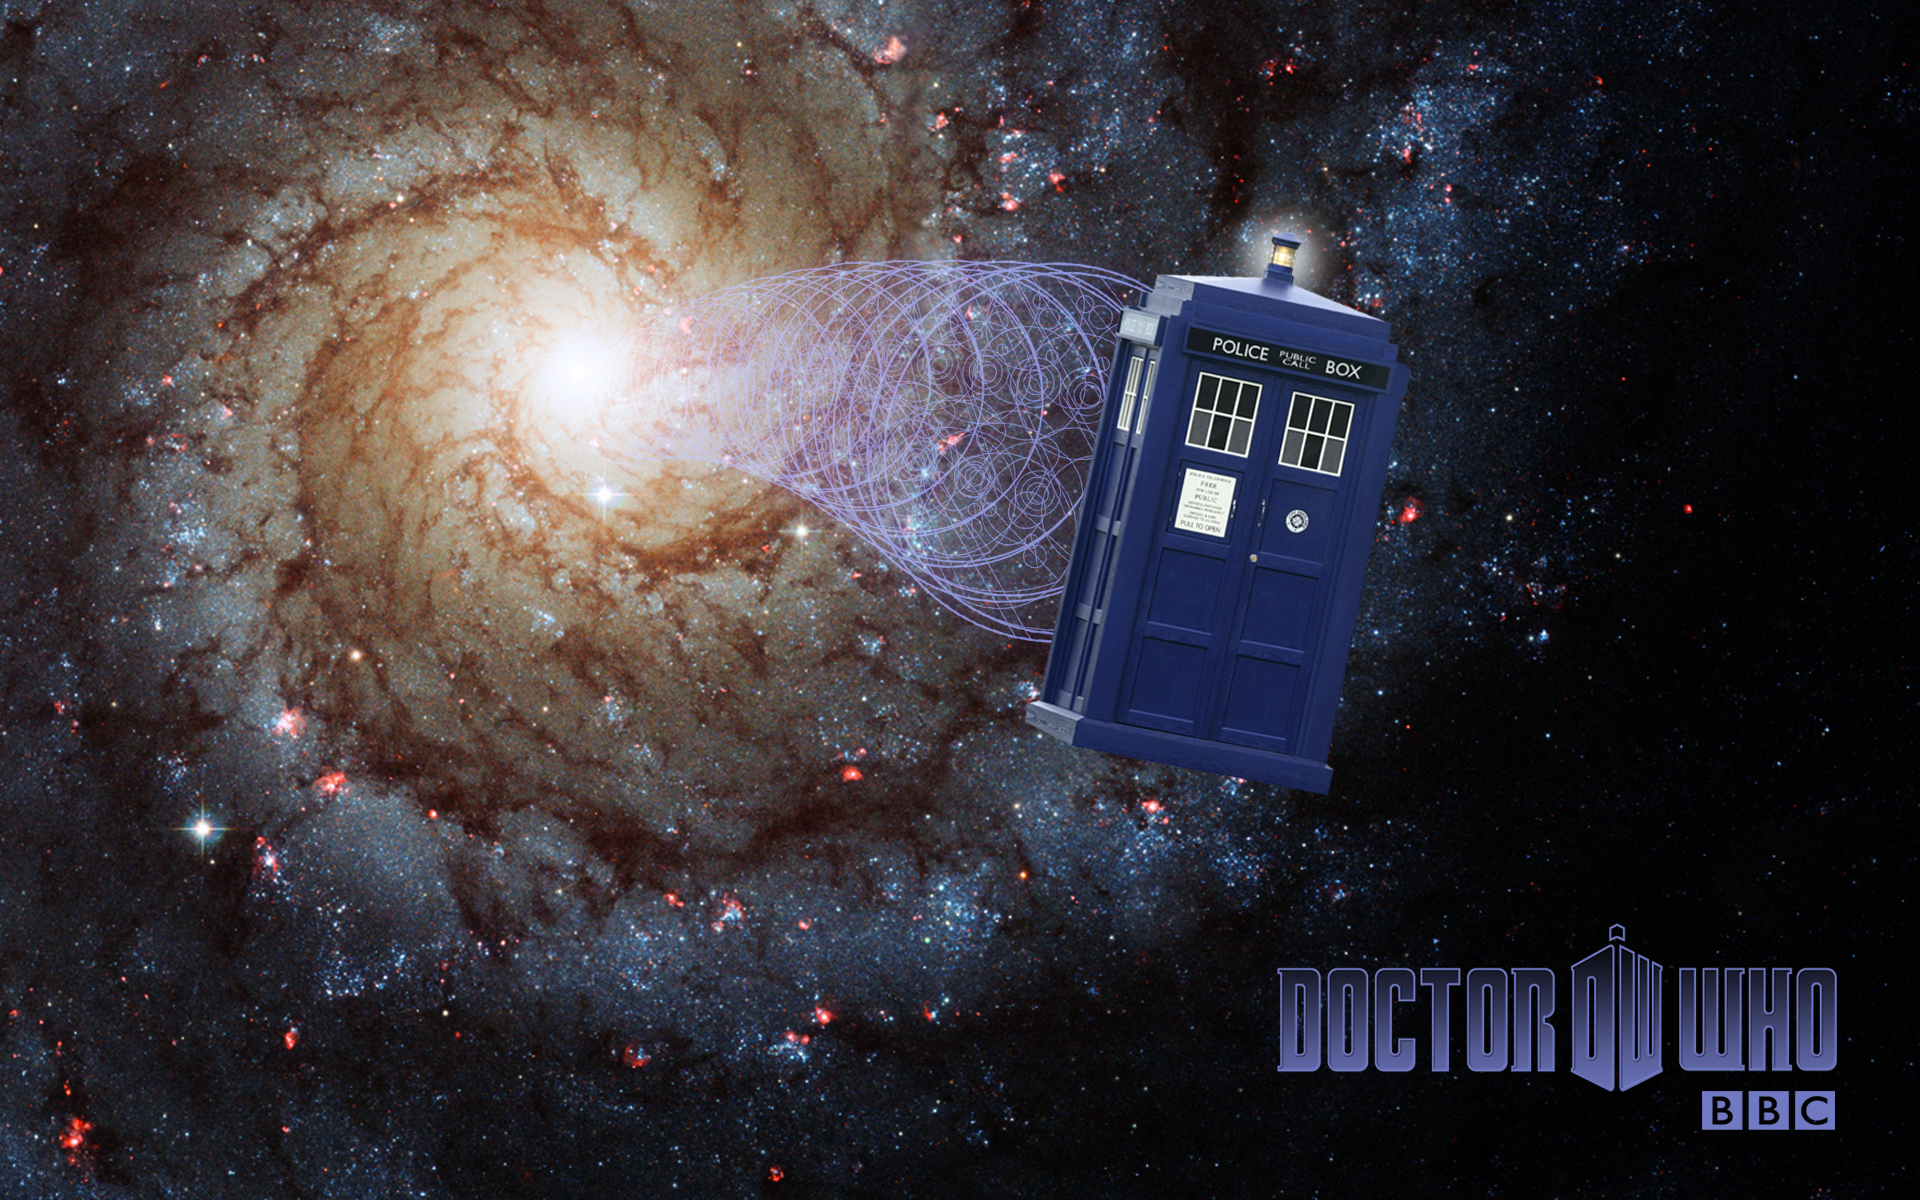 Doctor Who 1920x1200